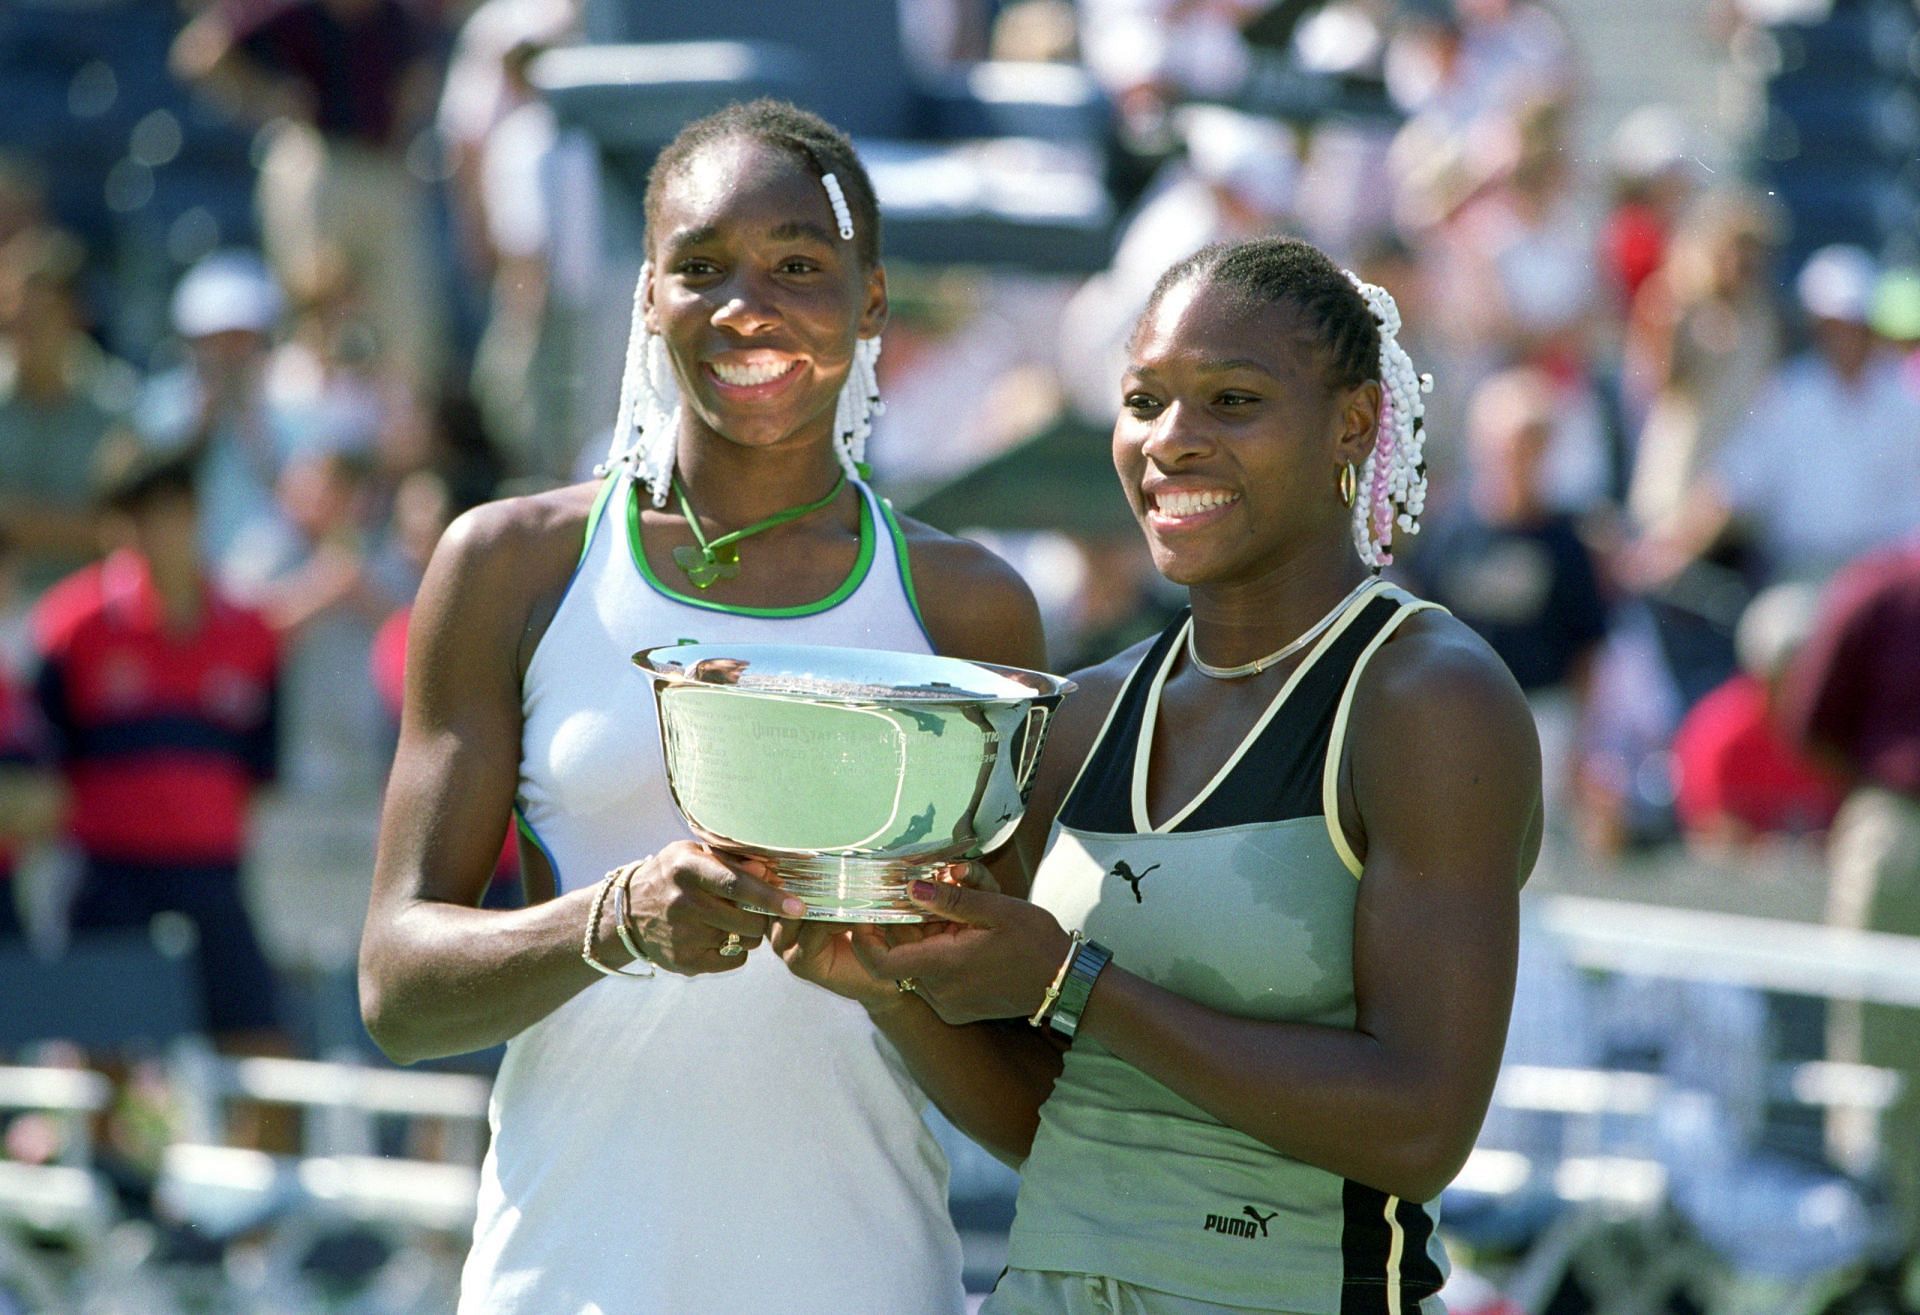 The Williams Sisters pictured at the 1999 US Open with their doubles trophy